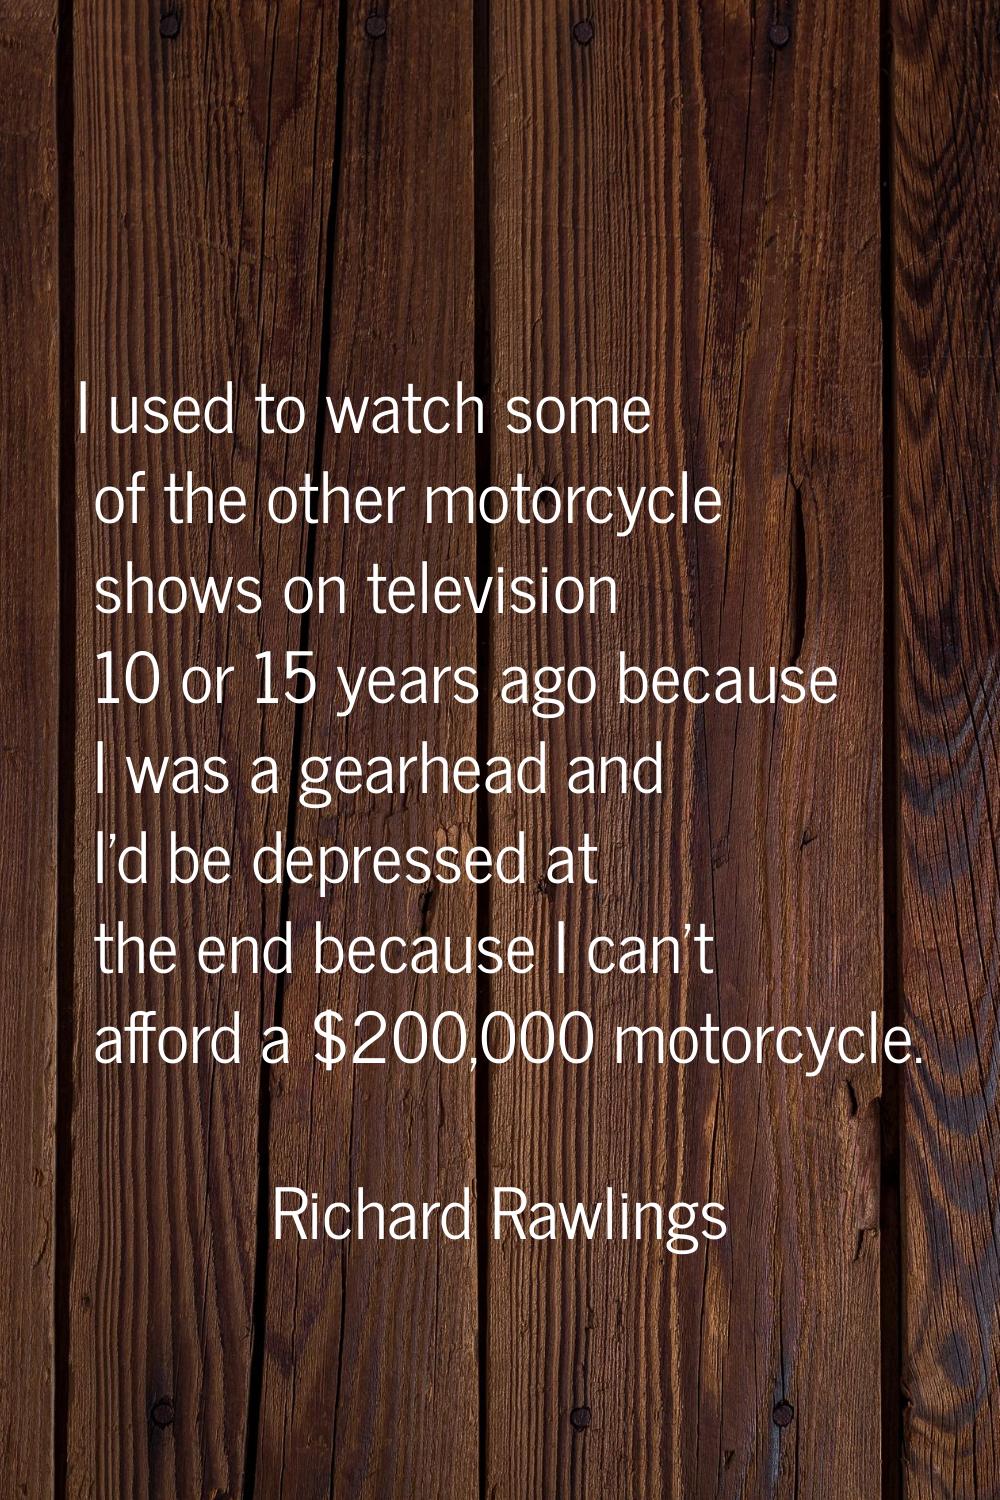 I used to watch some of the other motorcycle shows on television 10 or 15 years ago because I was a